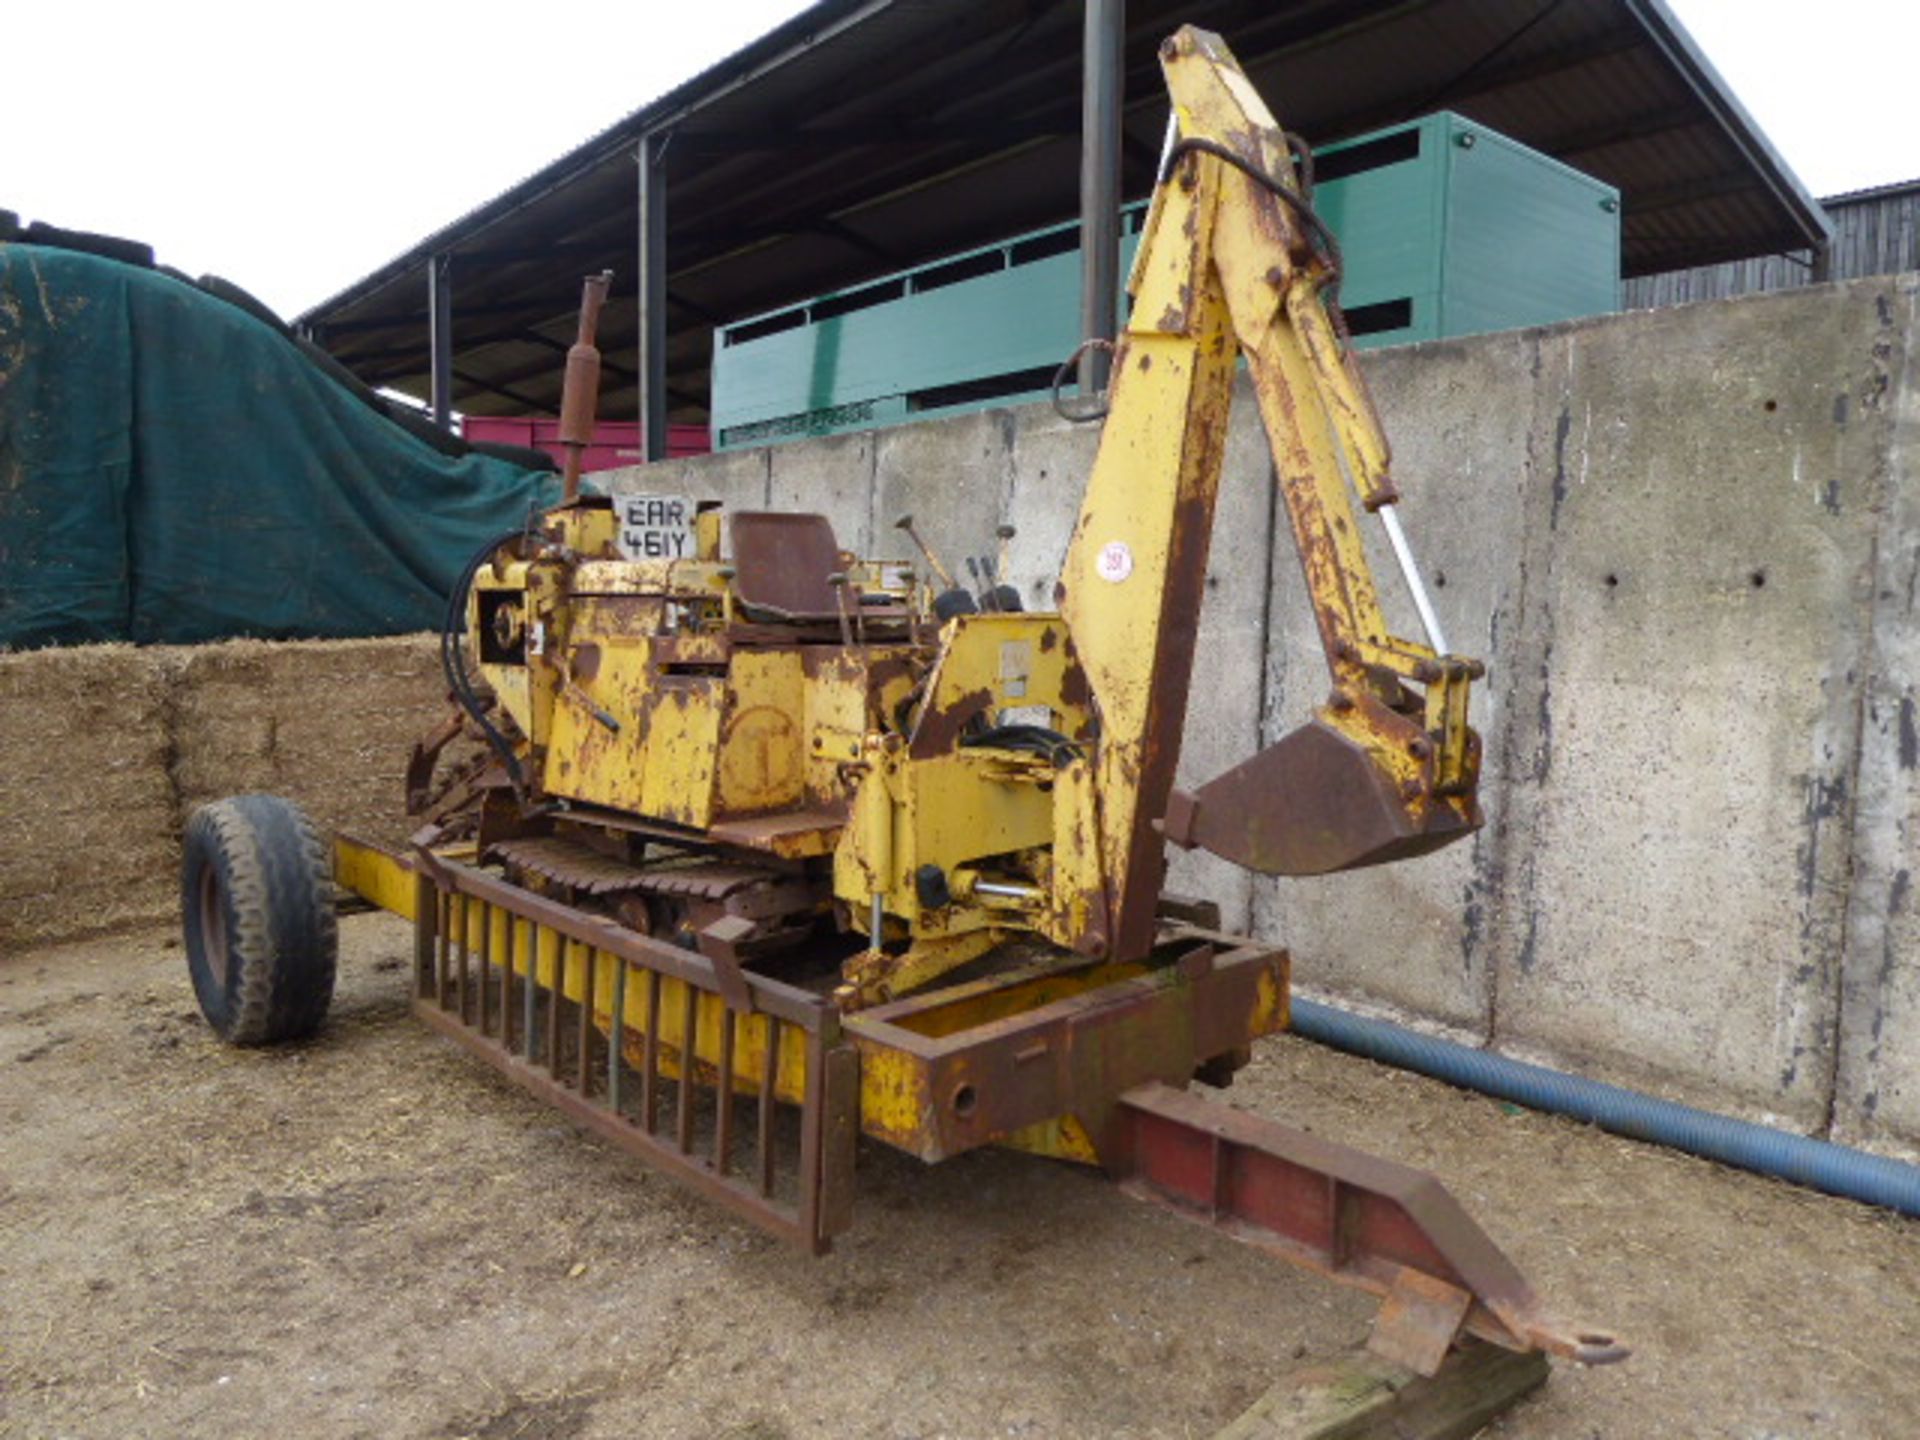 T39 AFT Trencher (starts/runs) Reg EAR461Y 2894 hours on low loader